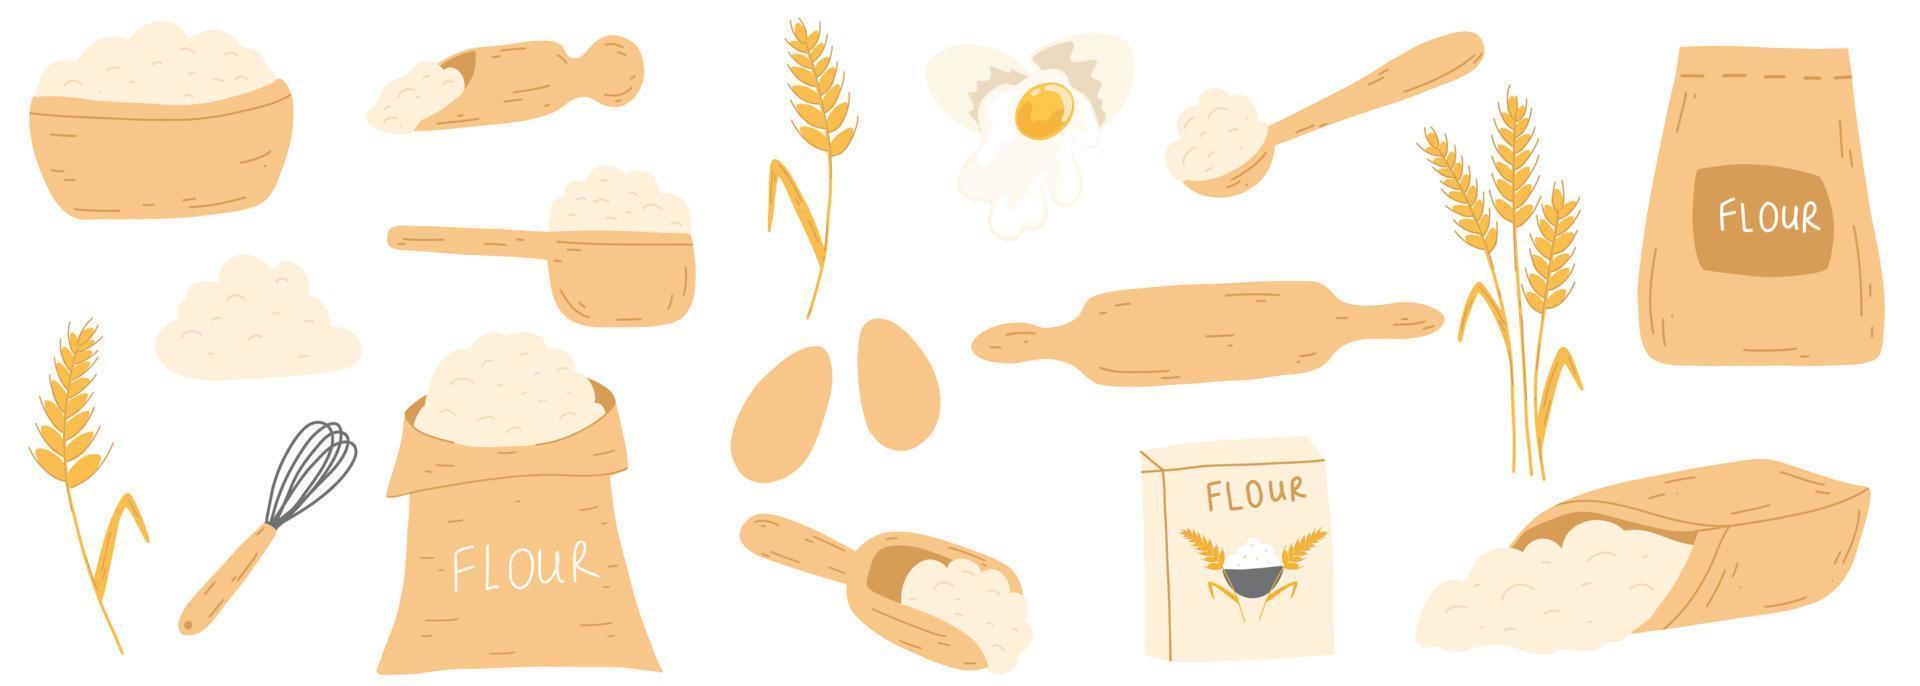 Baking ingredients in cartoon flat style. Bag with flour, eggs, kitchen whisk, rolling pin, wheat ear spikelet. Vector illustration set for pastry cooking